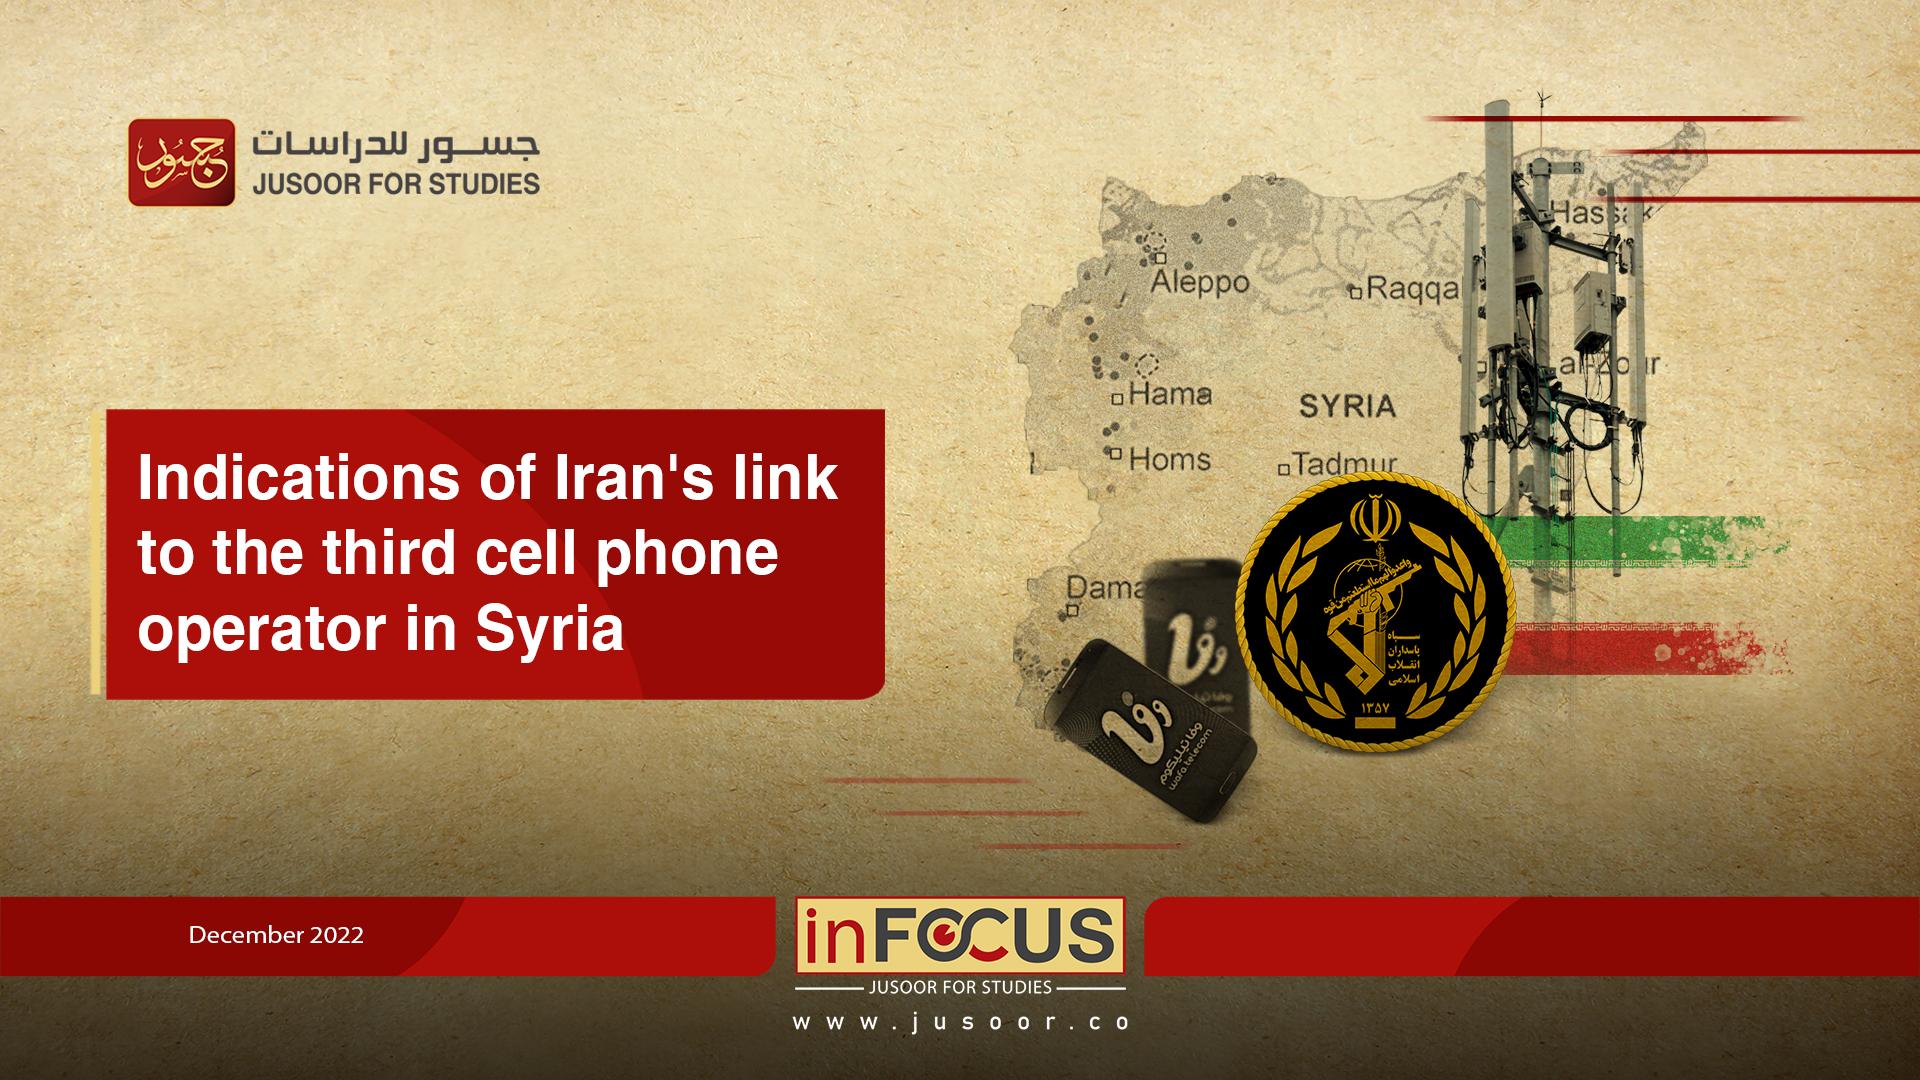 Indications of Iran's link to the third cell phone operator in Syria